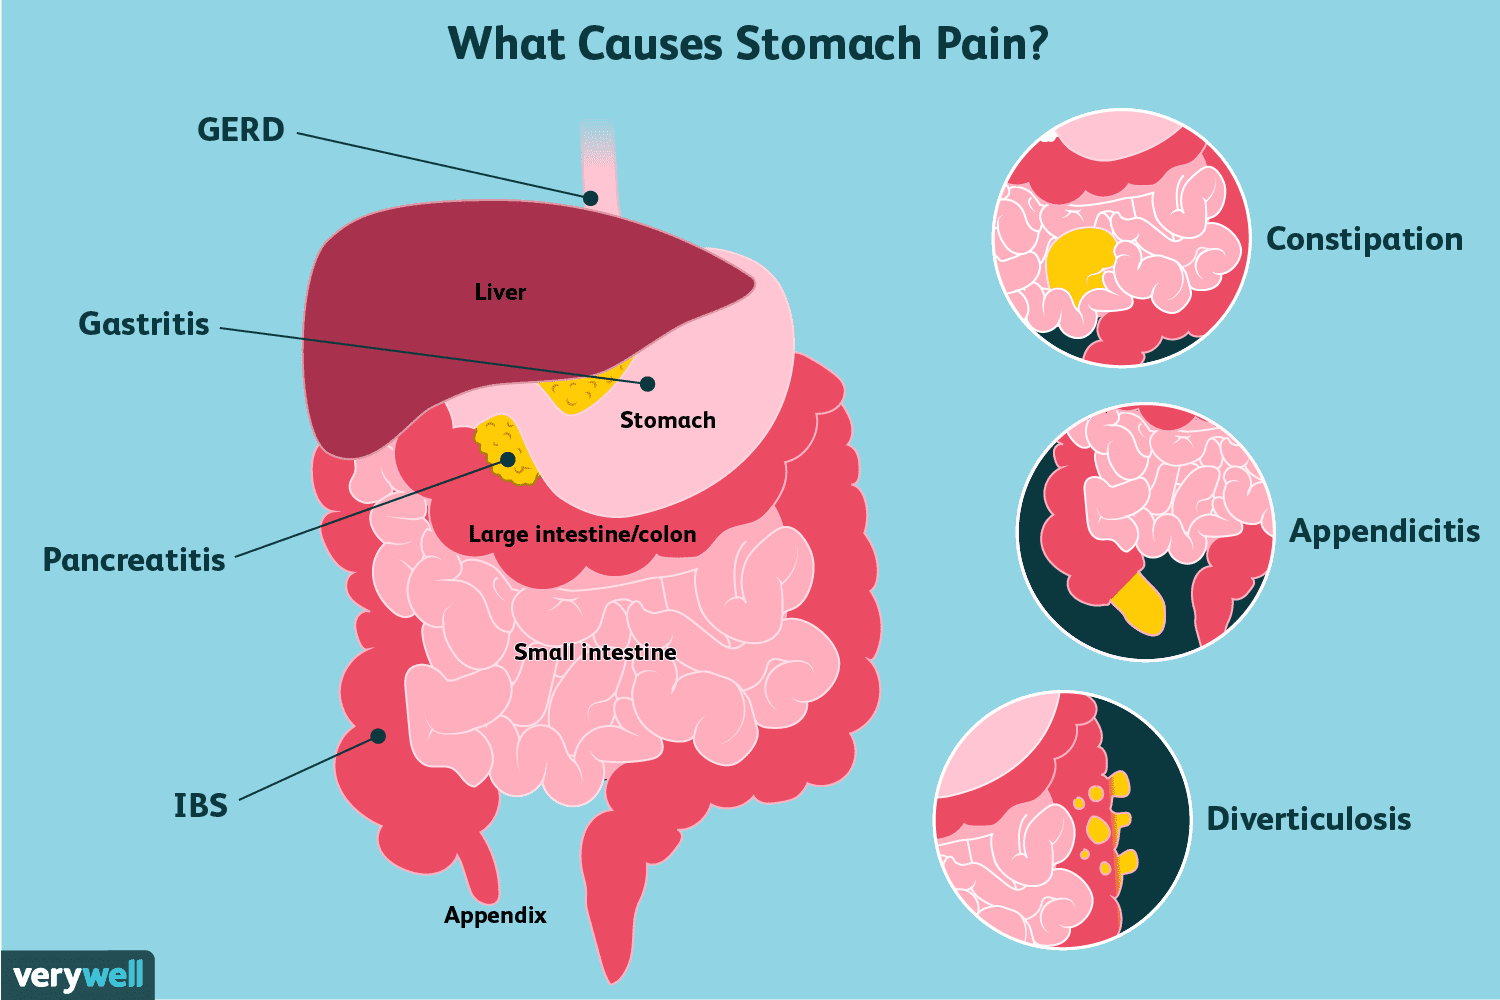 Stomach Pain: Causes, Treatment, and When to See a Doctor